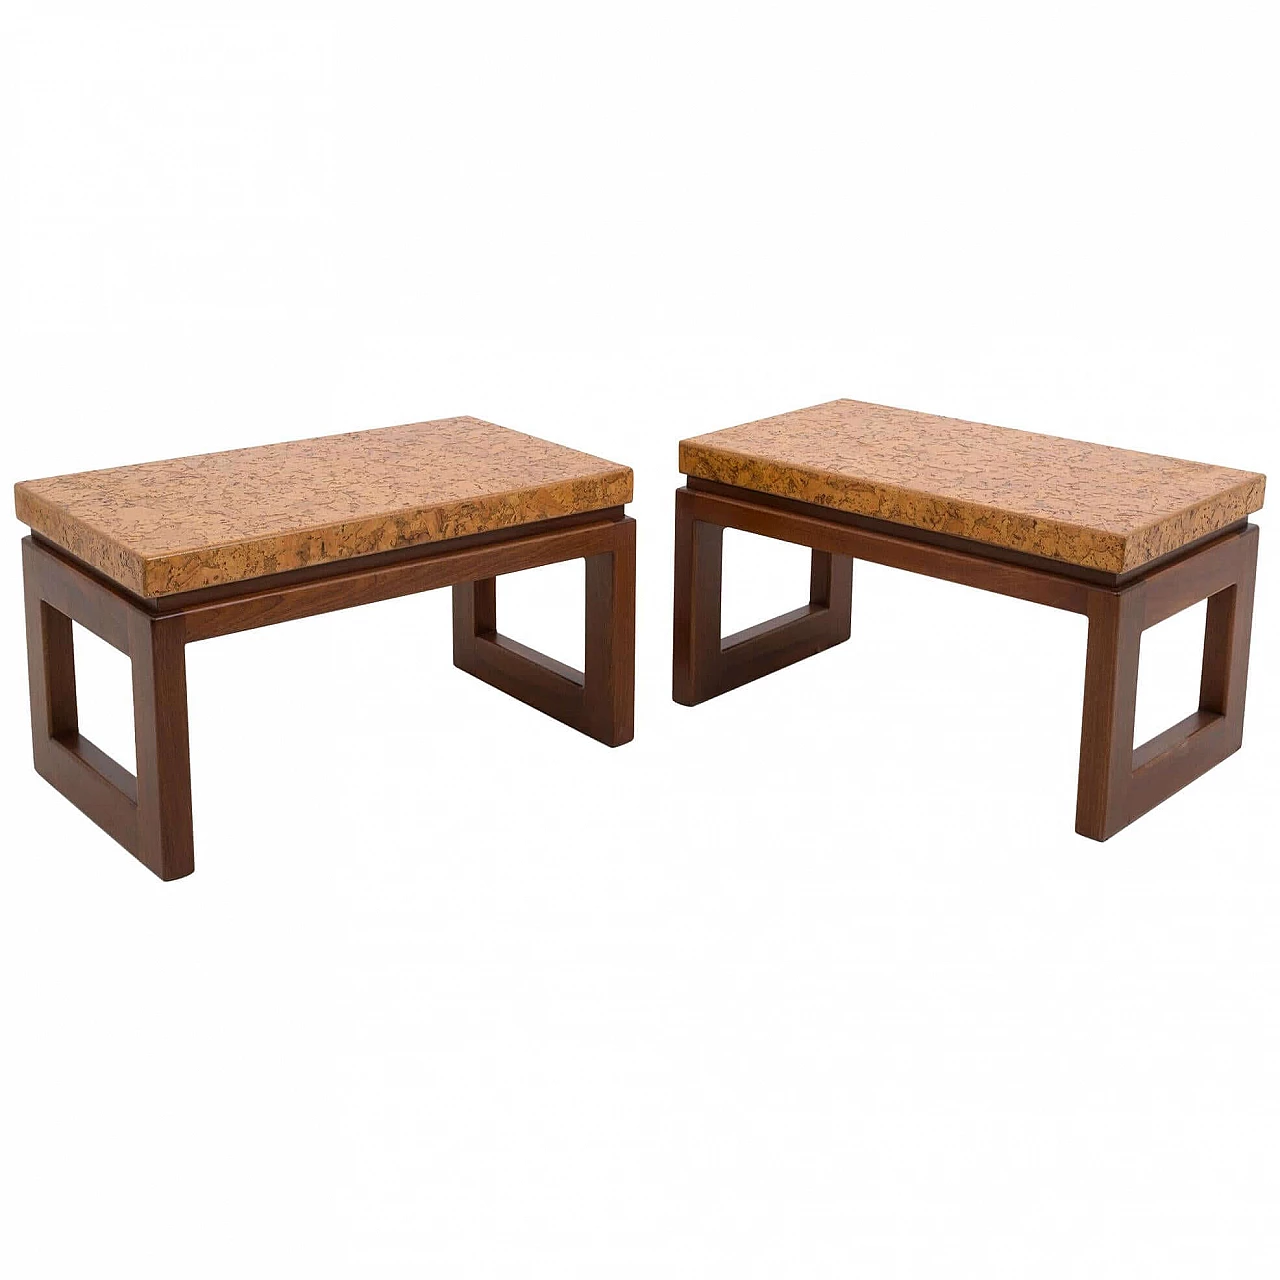 Pair of stools by Paul Frankl for the Johnson Furniture Company, 1960s 1412769